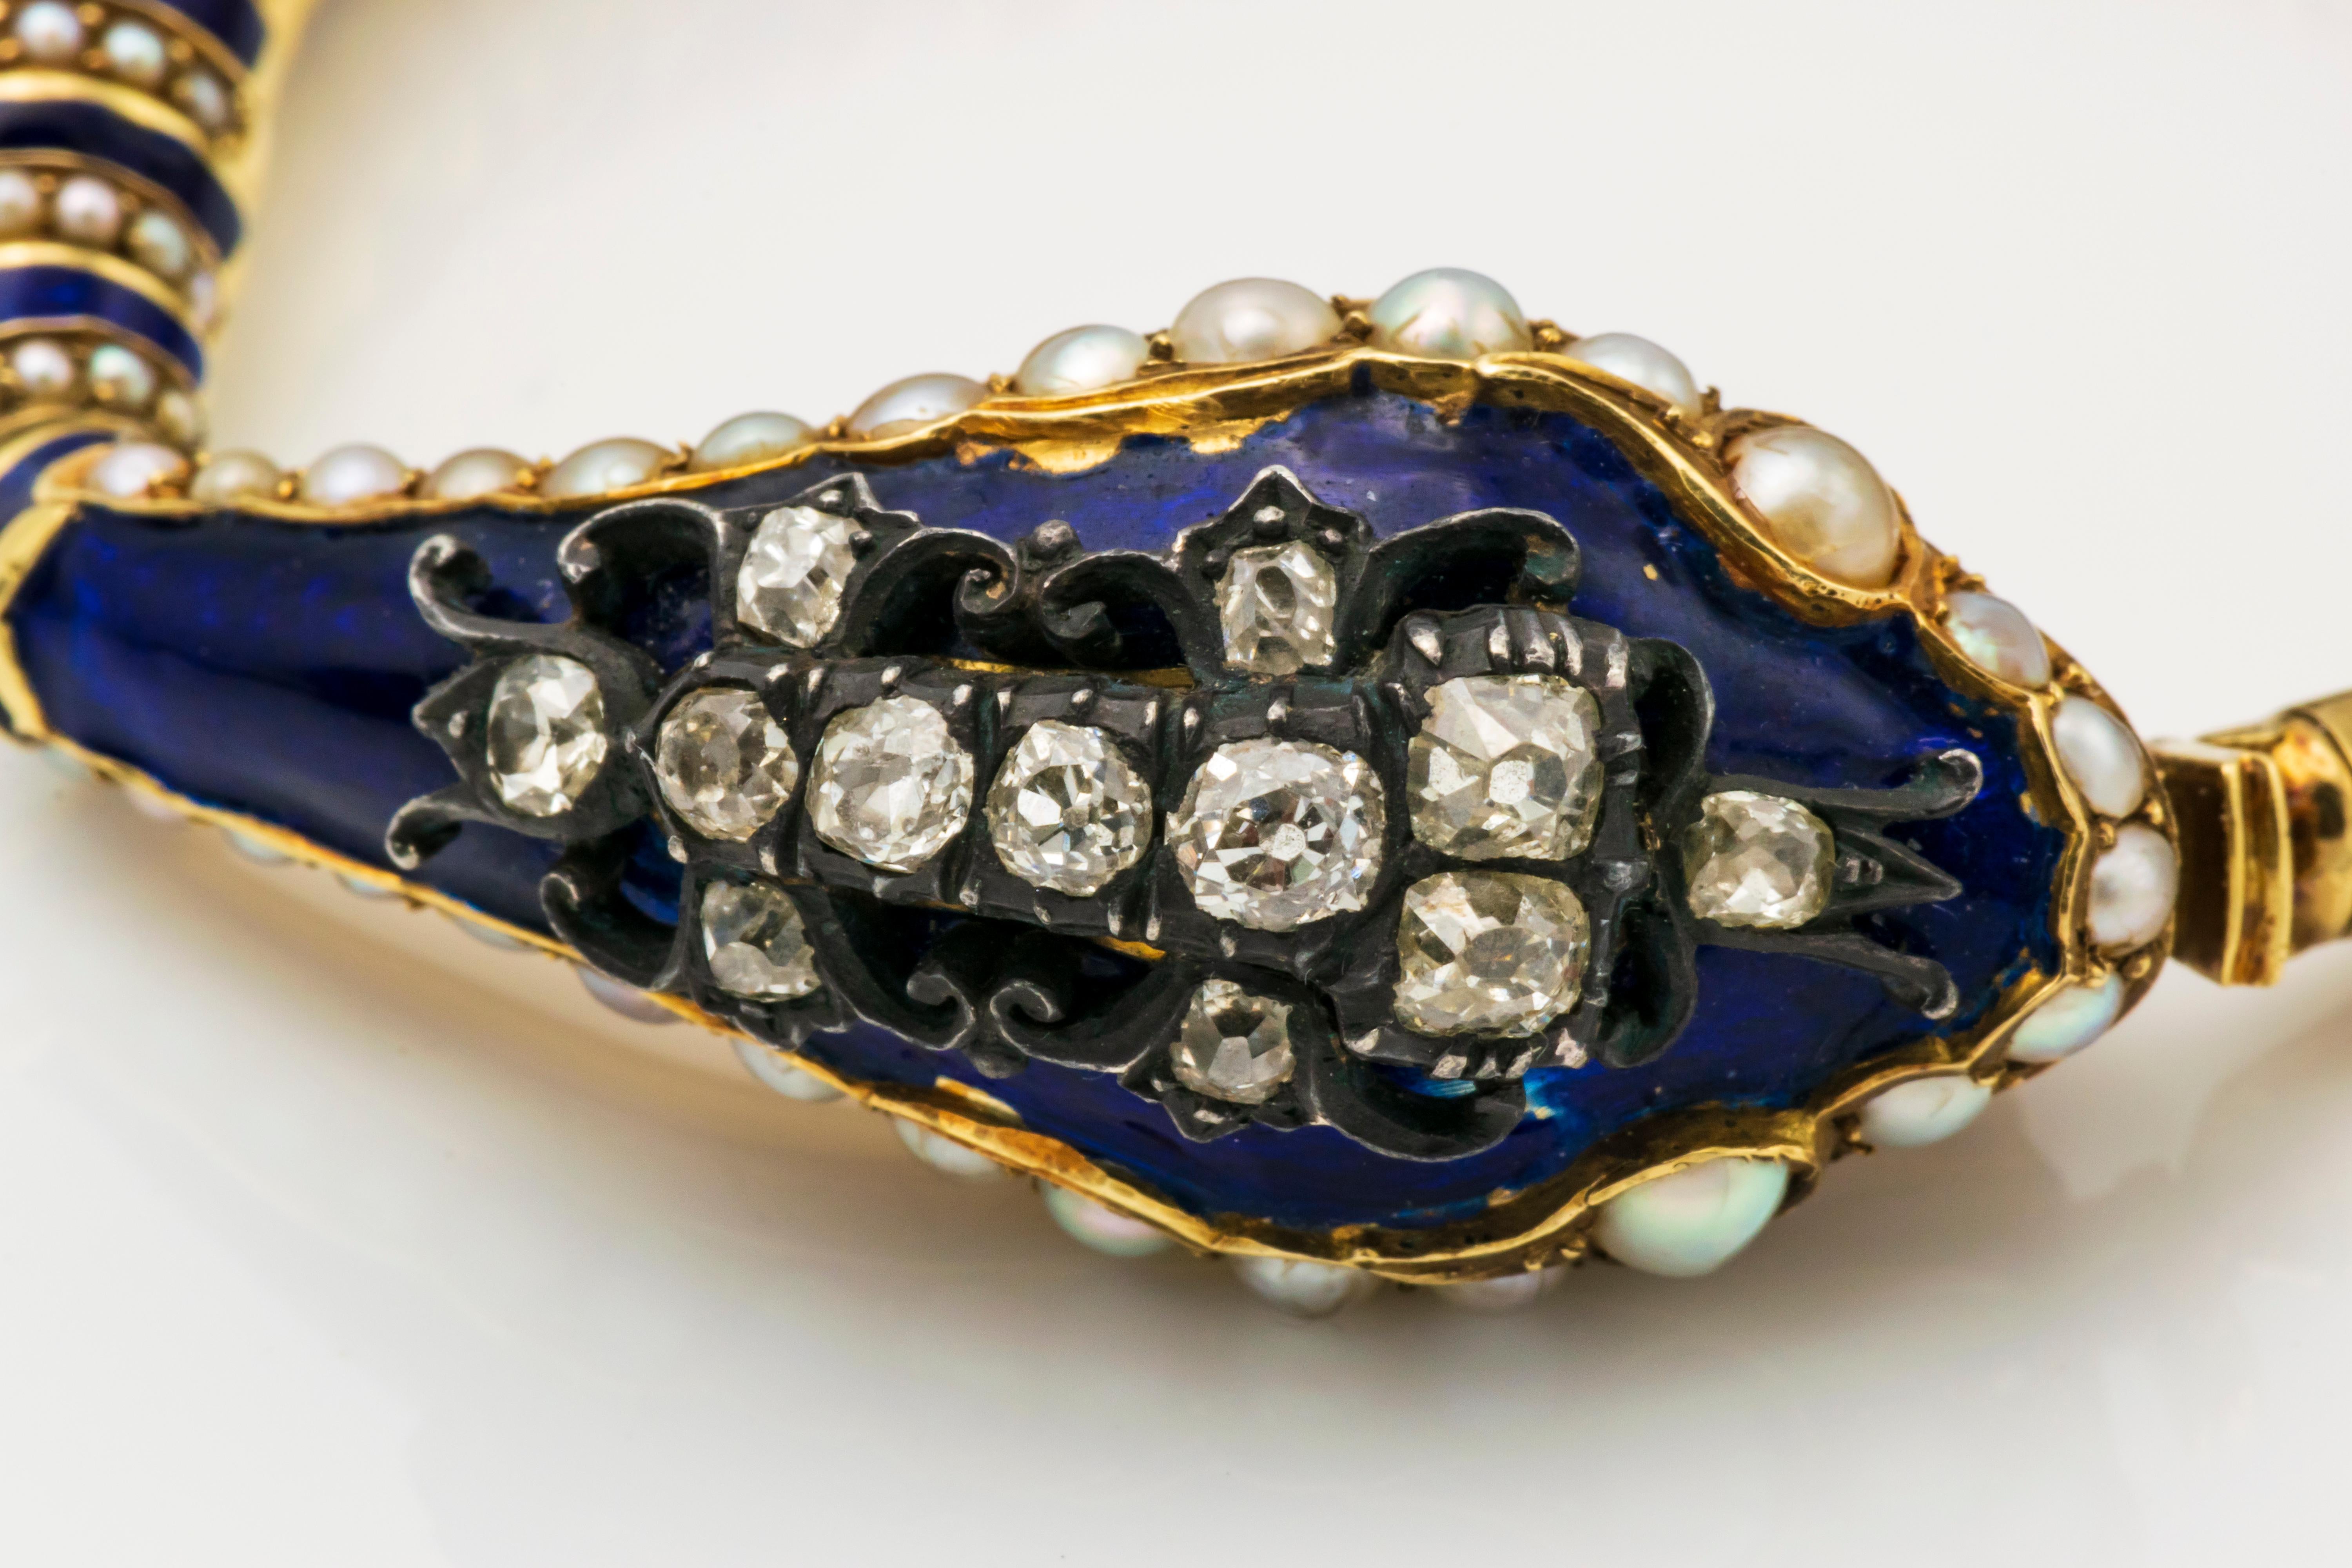 Designed as serpent, the gold head inset with split pearls, applied with blue enamel, surmounted with an openworks silver motif set with twelve old mine-cut diamonds, the body composed of nesting hemispherical links applied with alternating blue